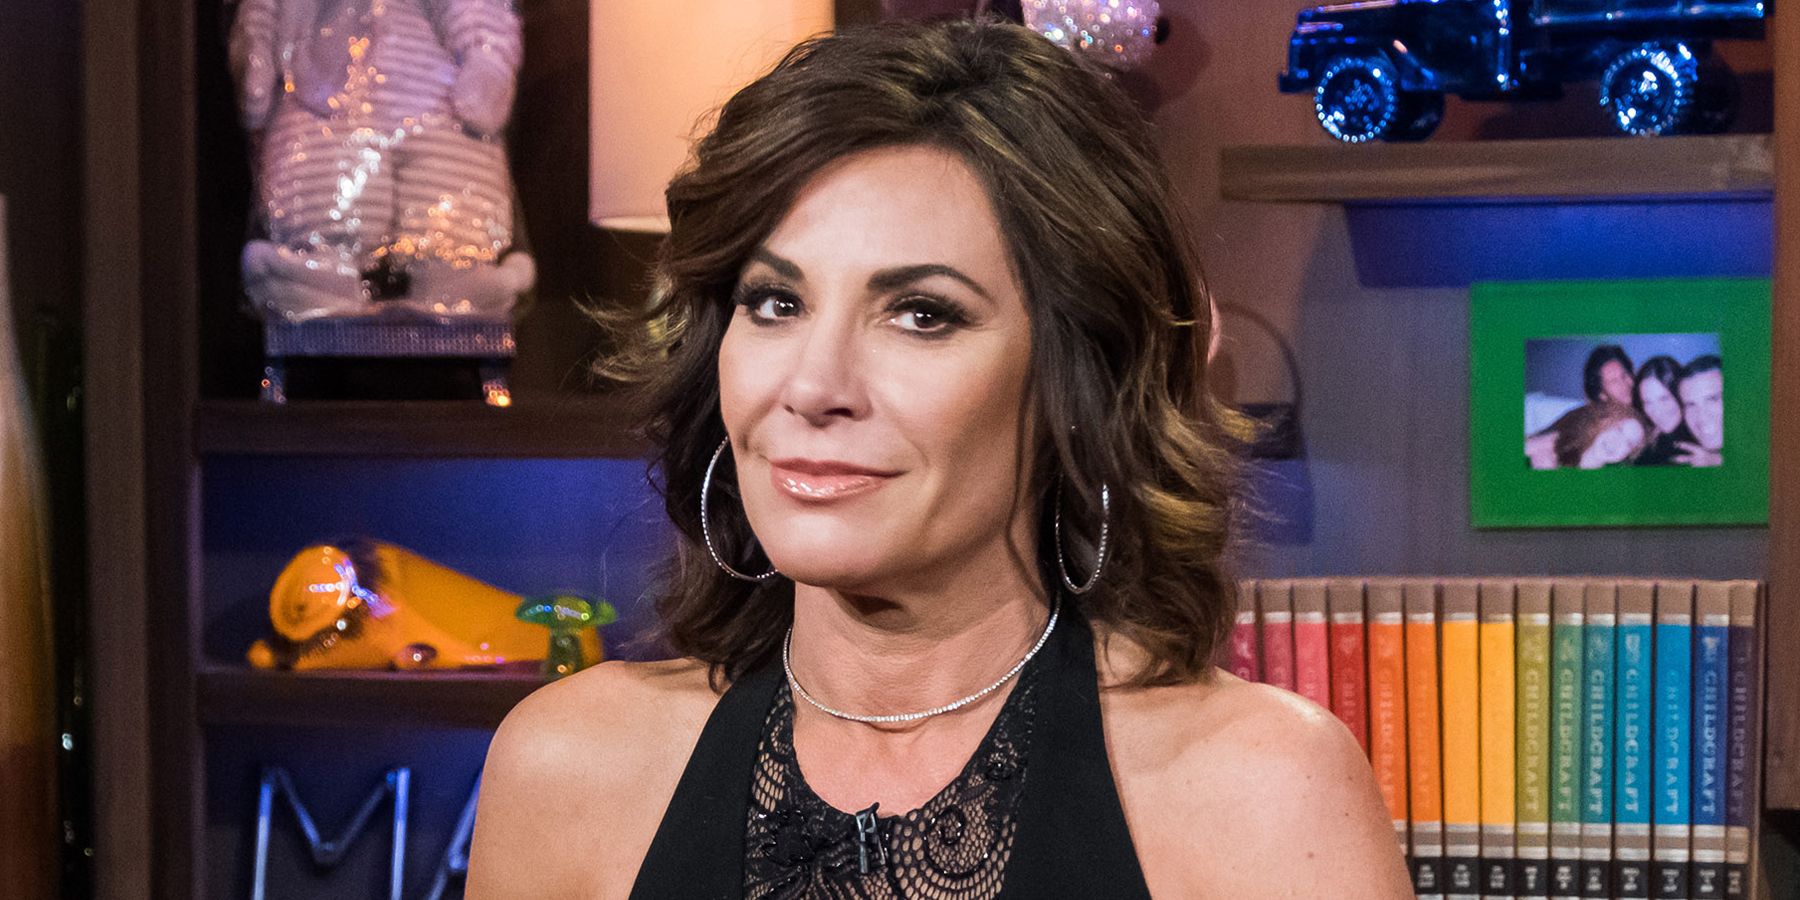 Real Housewives of New York star LuAnn de Lesseps 'Countess'